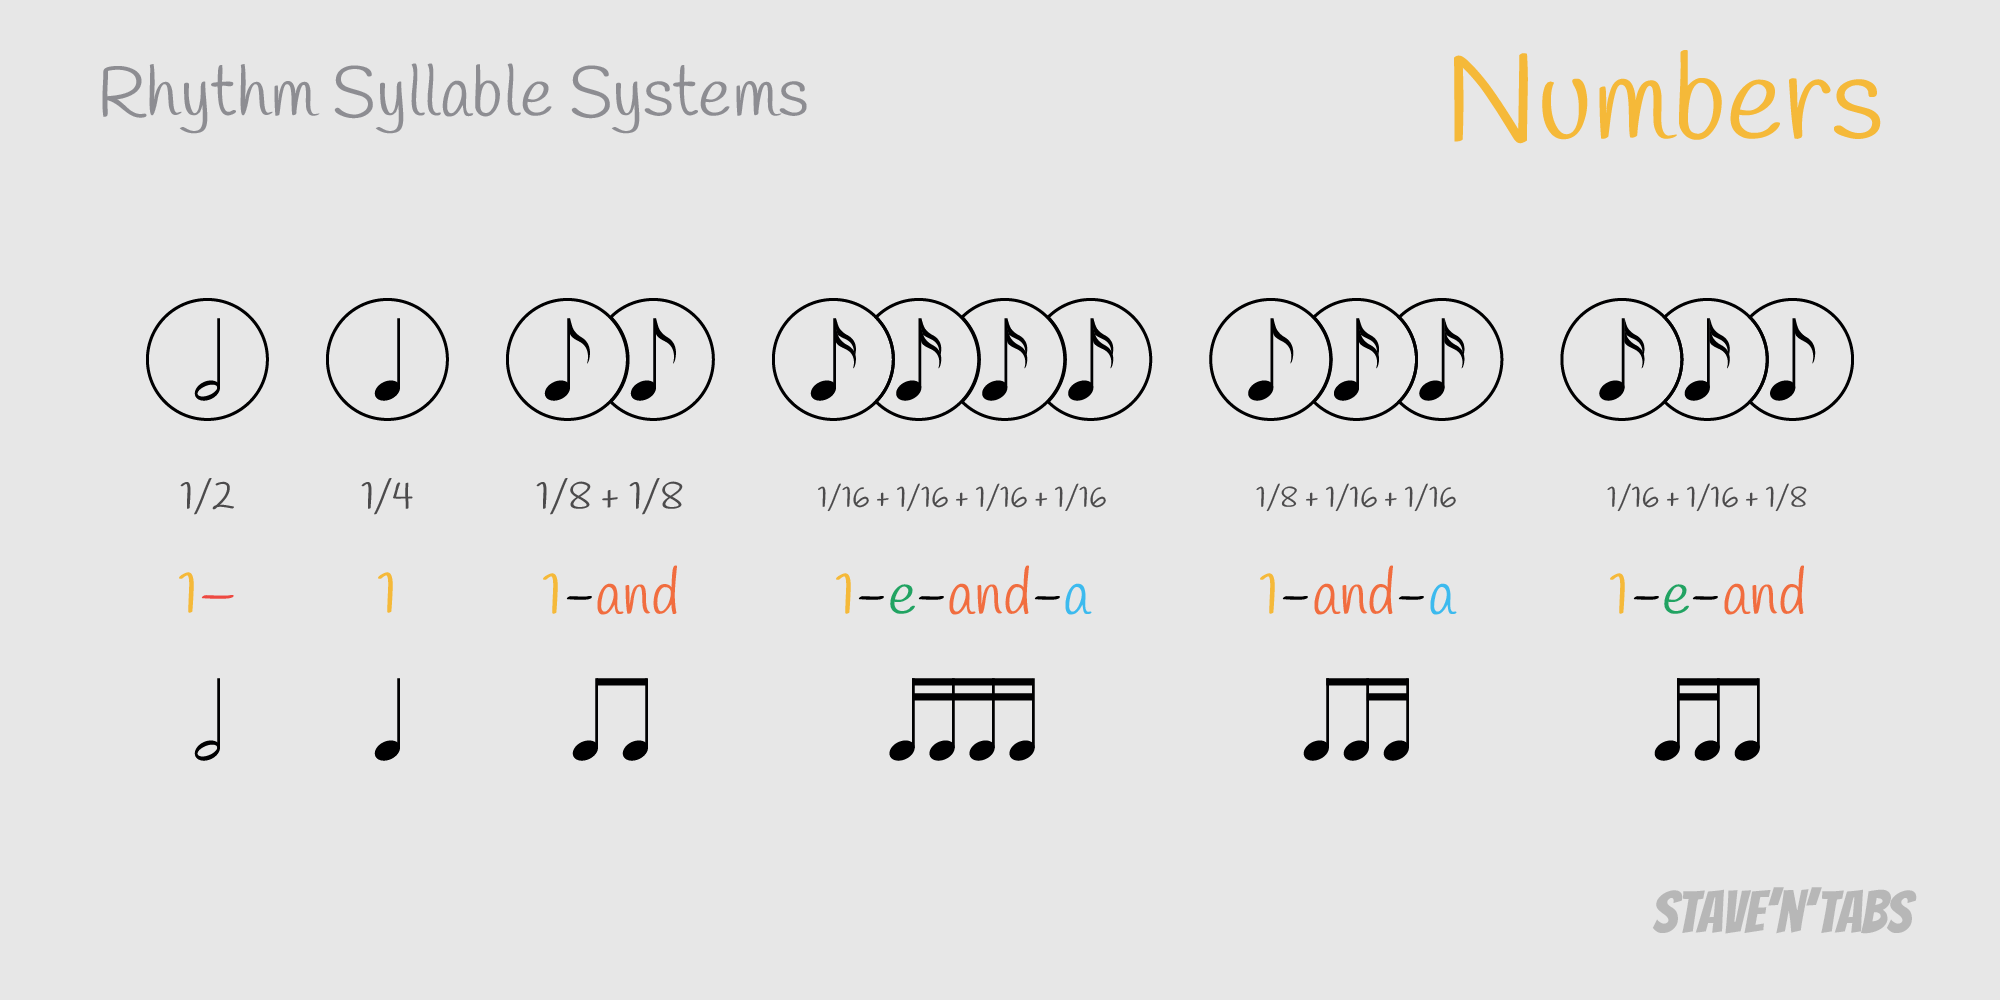 Numbers syllable system (1-E-&-A)